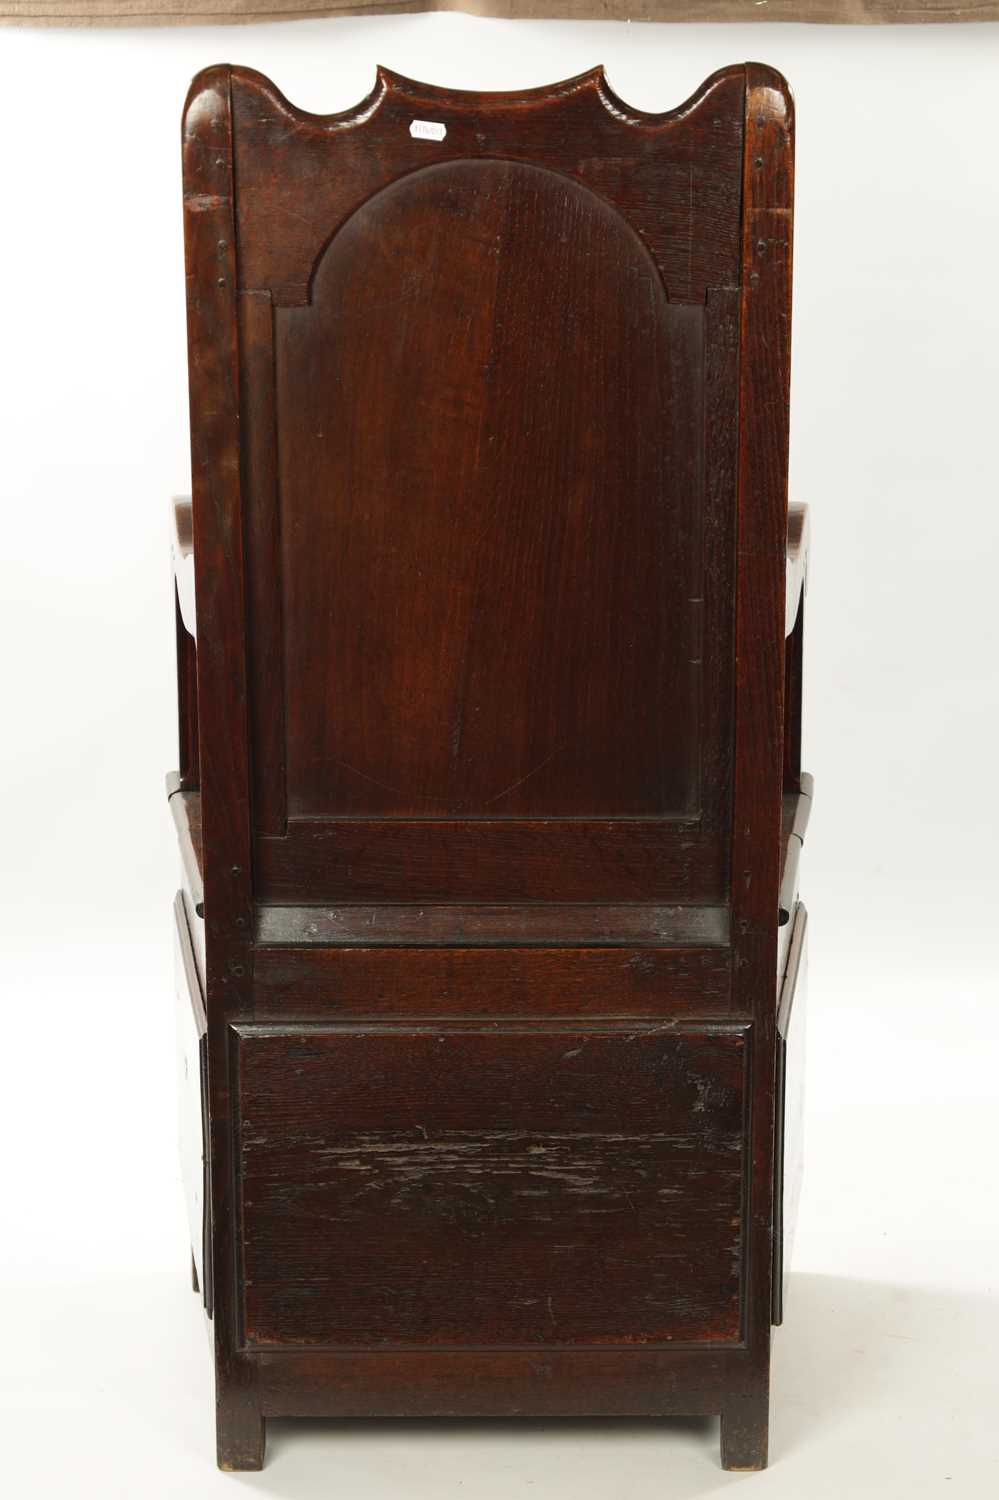 AN EARLY 18TH CENTURY JOINED OAK LAMBING CHAIR - Image 6 of 6